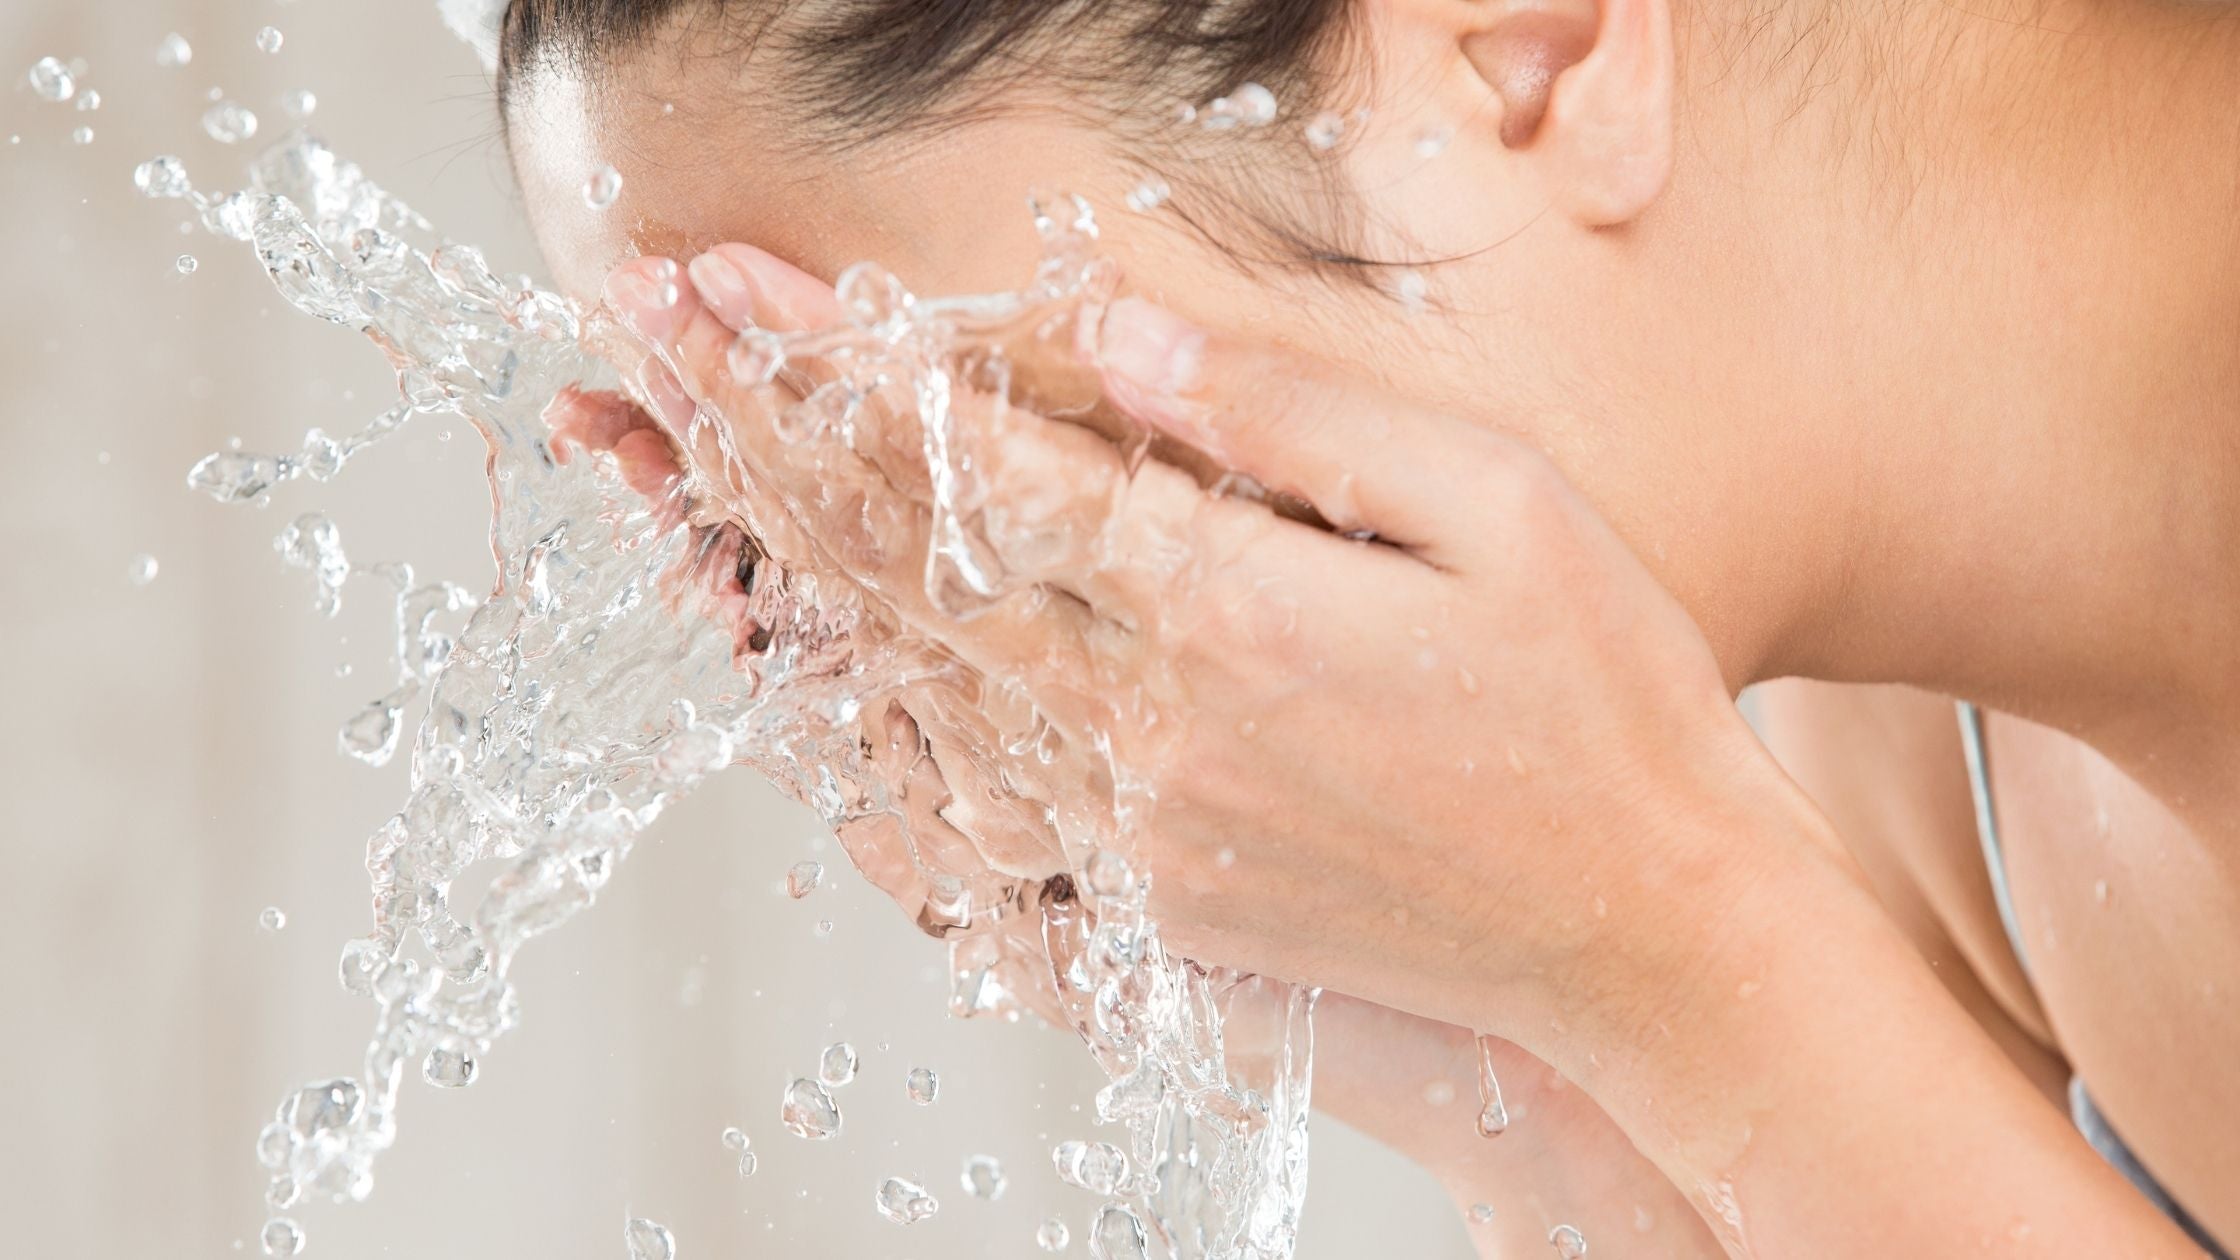 How often should you wash your face?